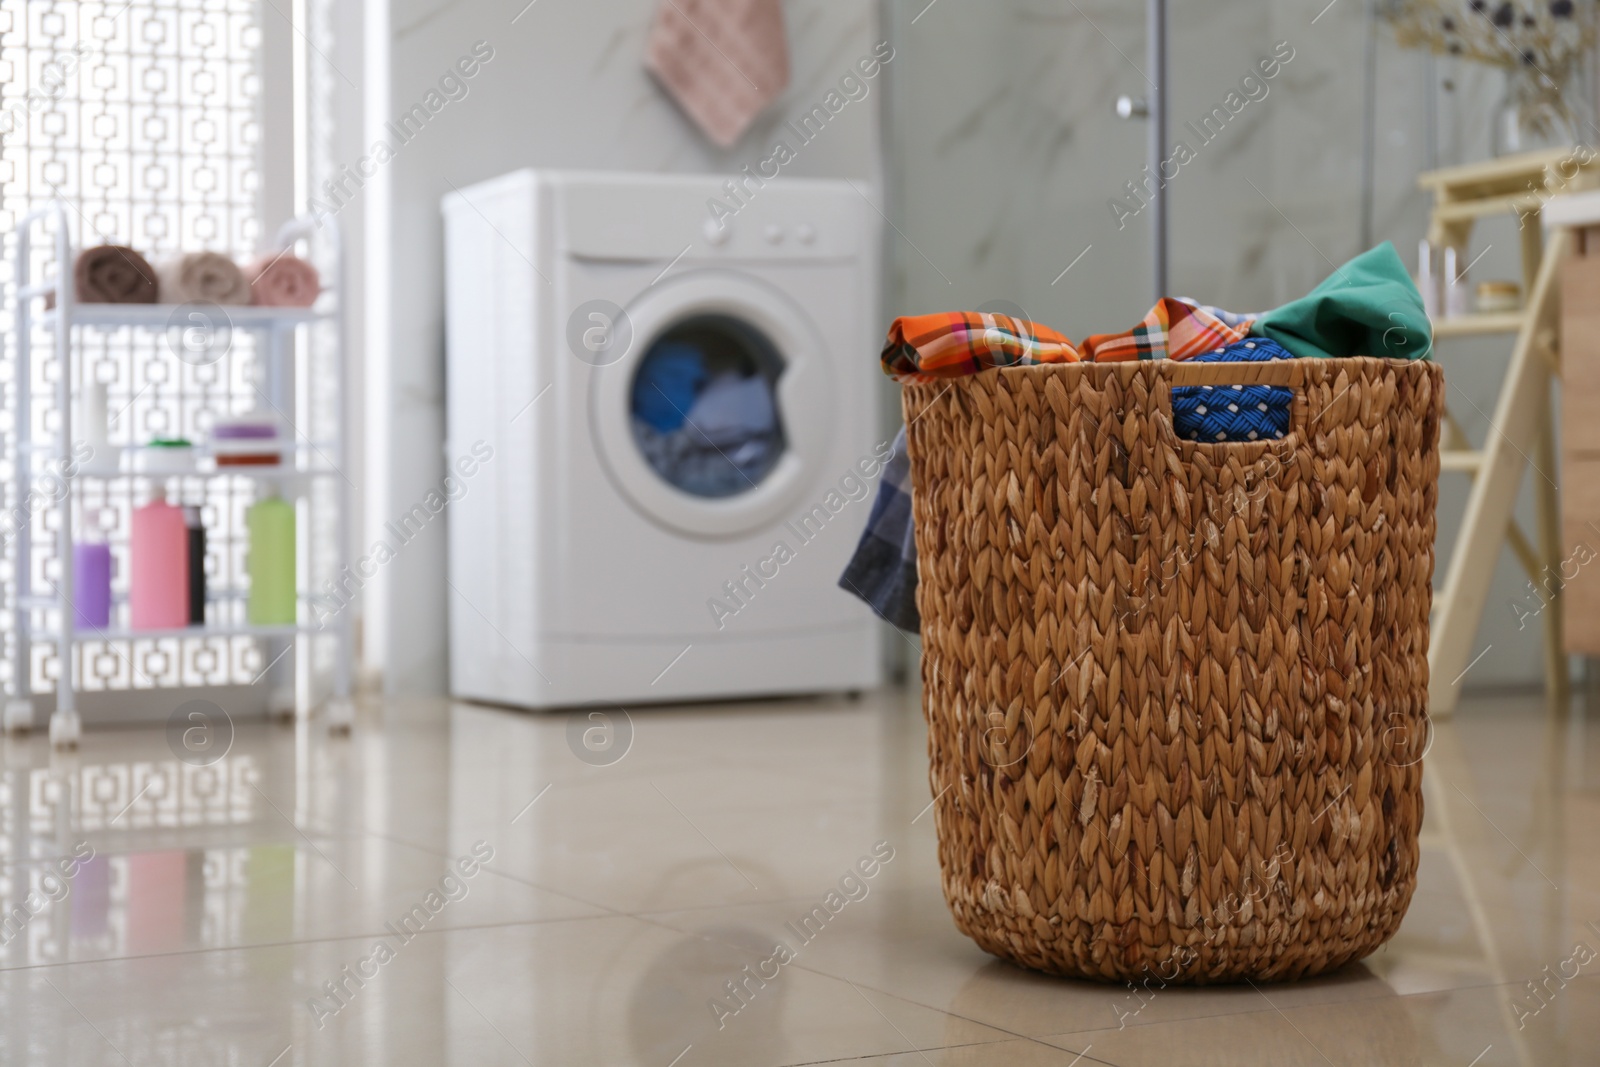 Photo of Wicker laundry basket full of different clothes on floor in bathroom